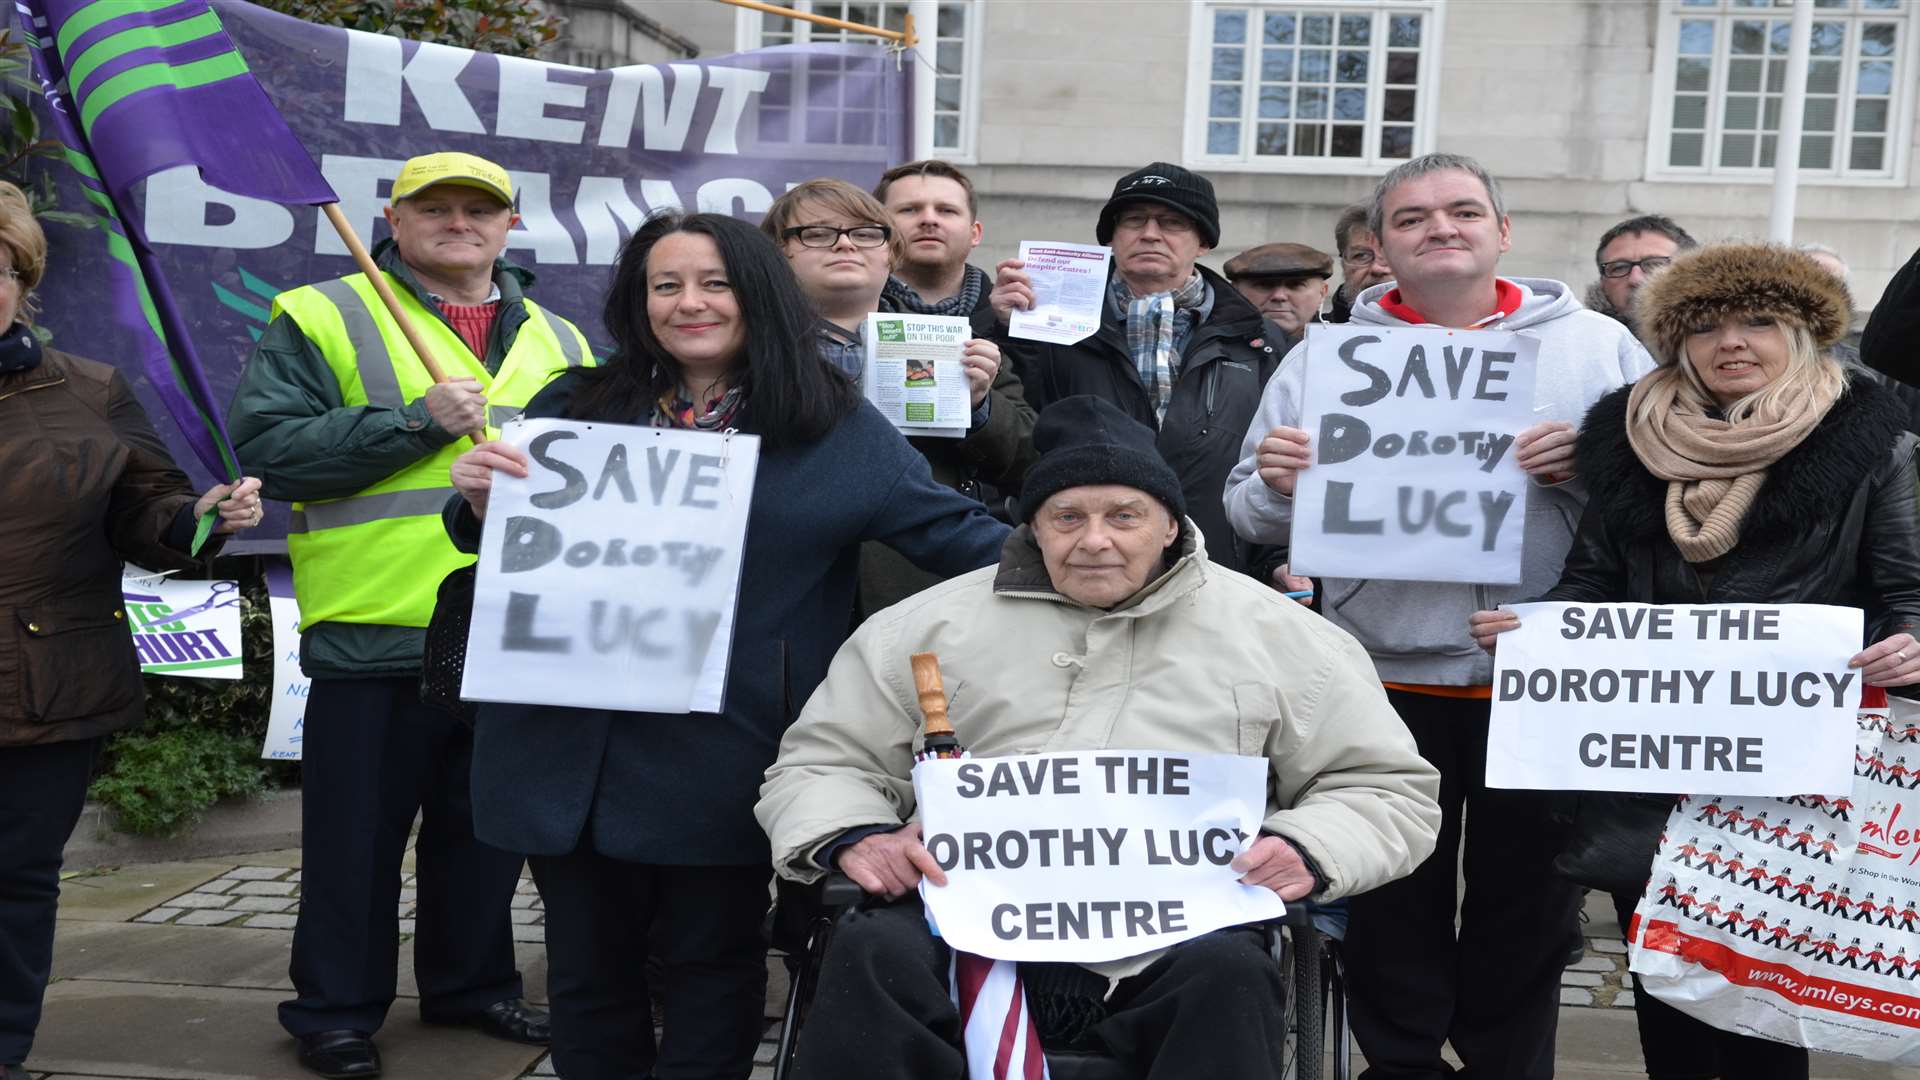 County hall saw a numb er of protests last year, including this one about closure of the Dorothy Lucy Centre. Picture: Bob Kitchin